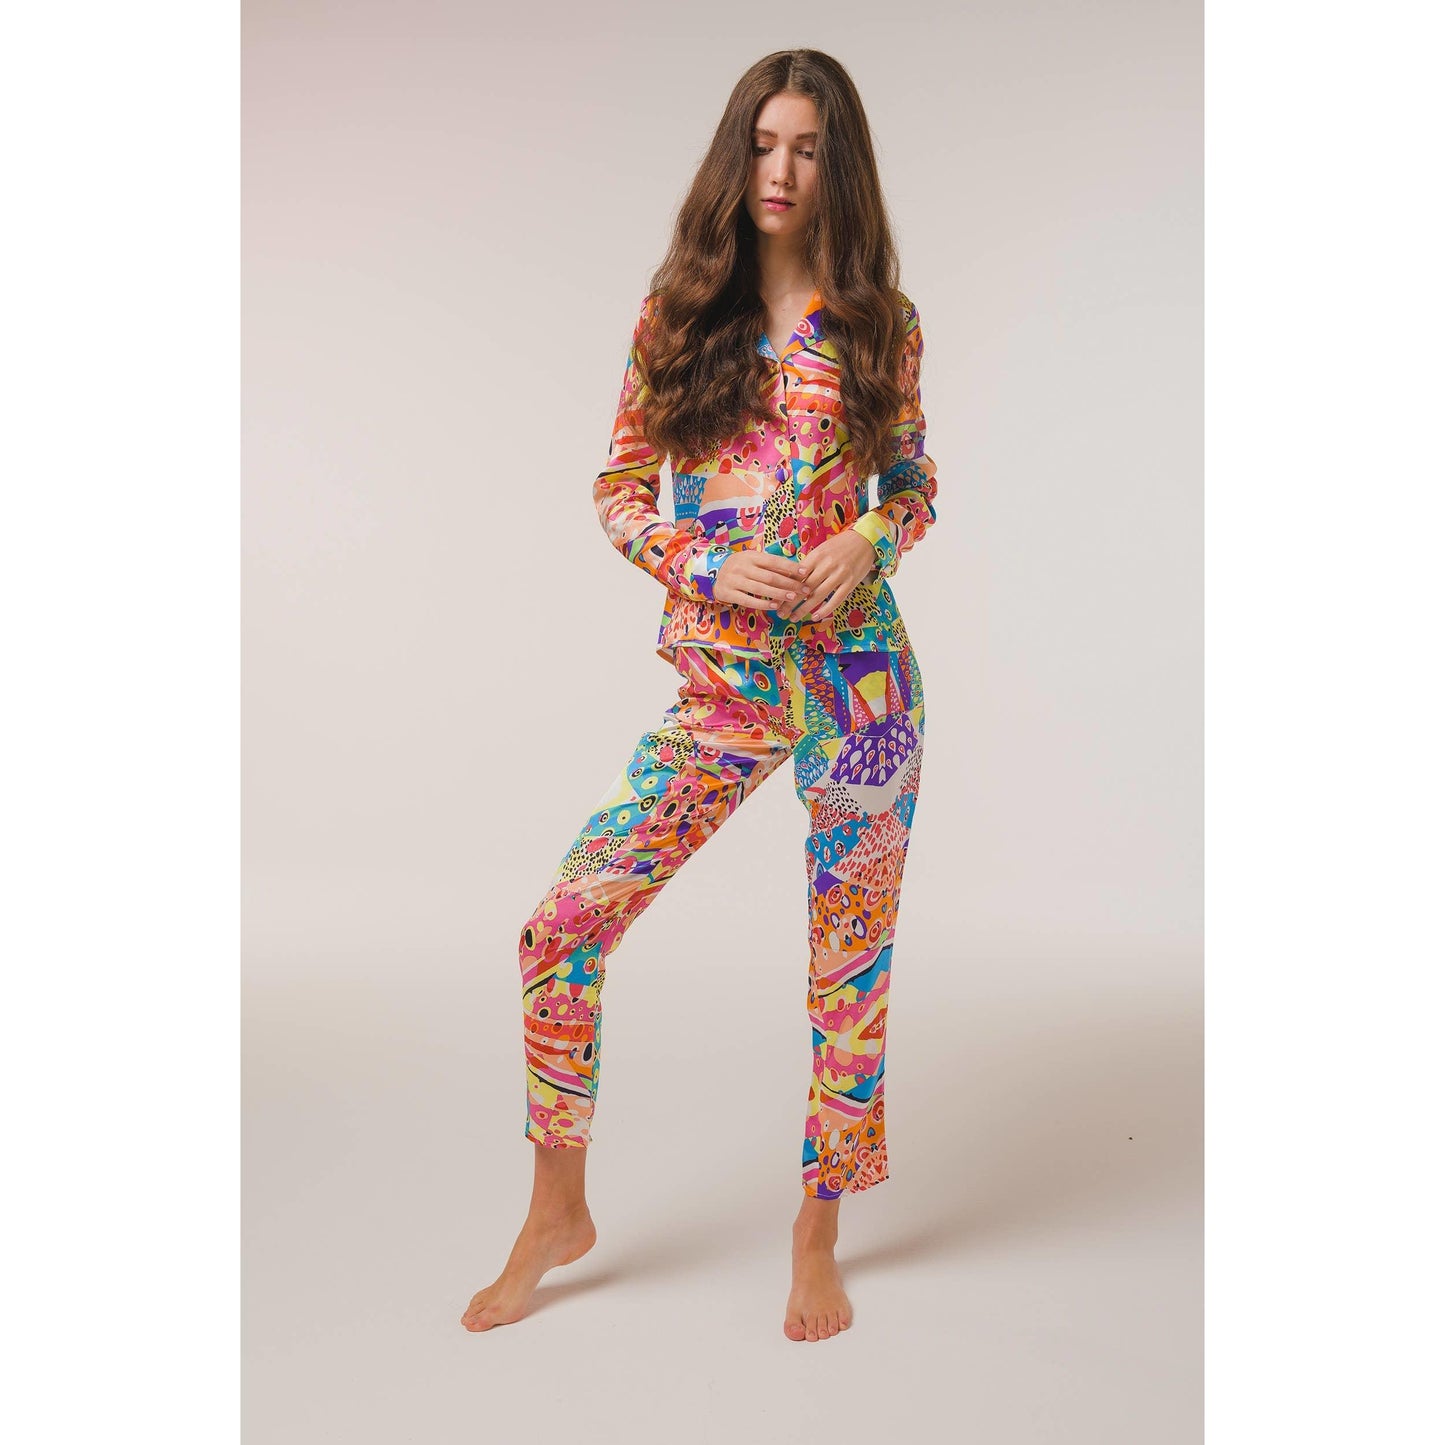 100% Silk Pyjama Set For Women with harlequin print worn by a model with brown hair